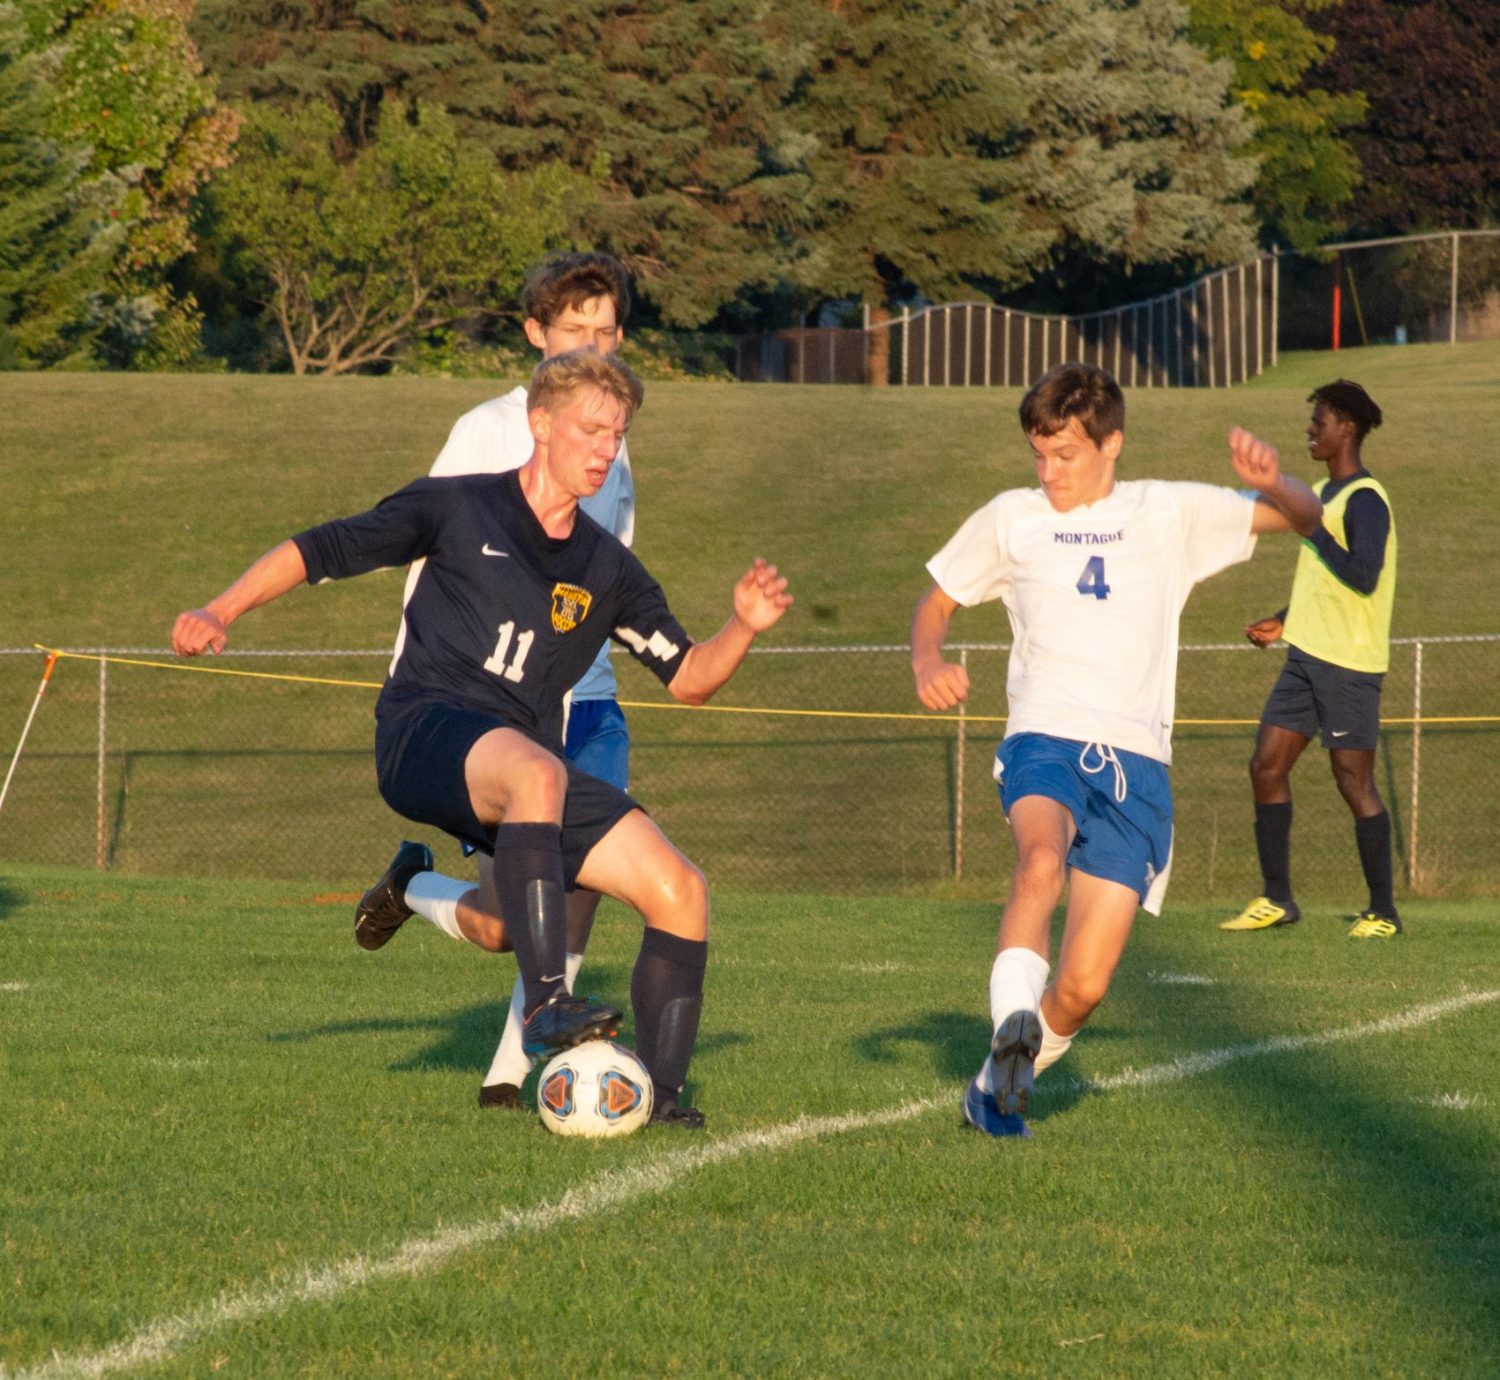 Manistee shuts out Montague 2-0 in Monday soccer action